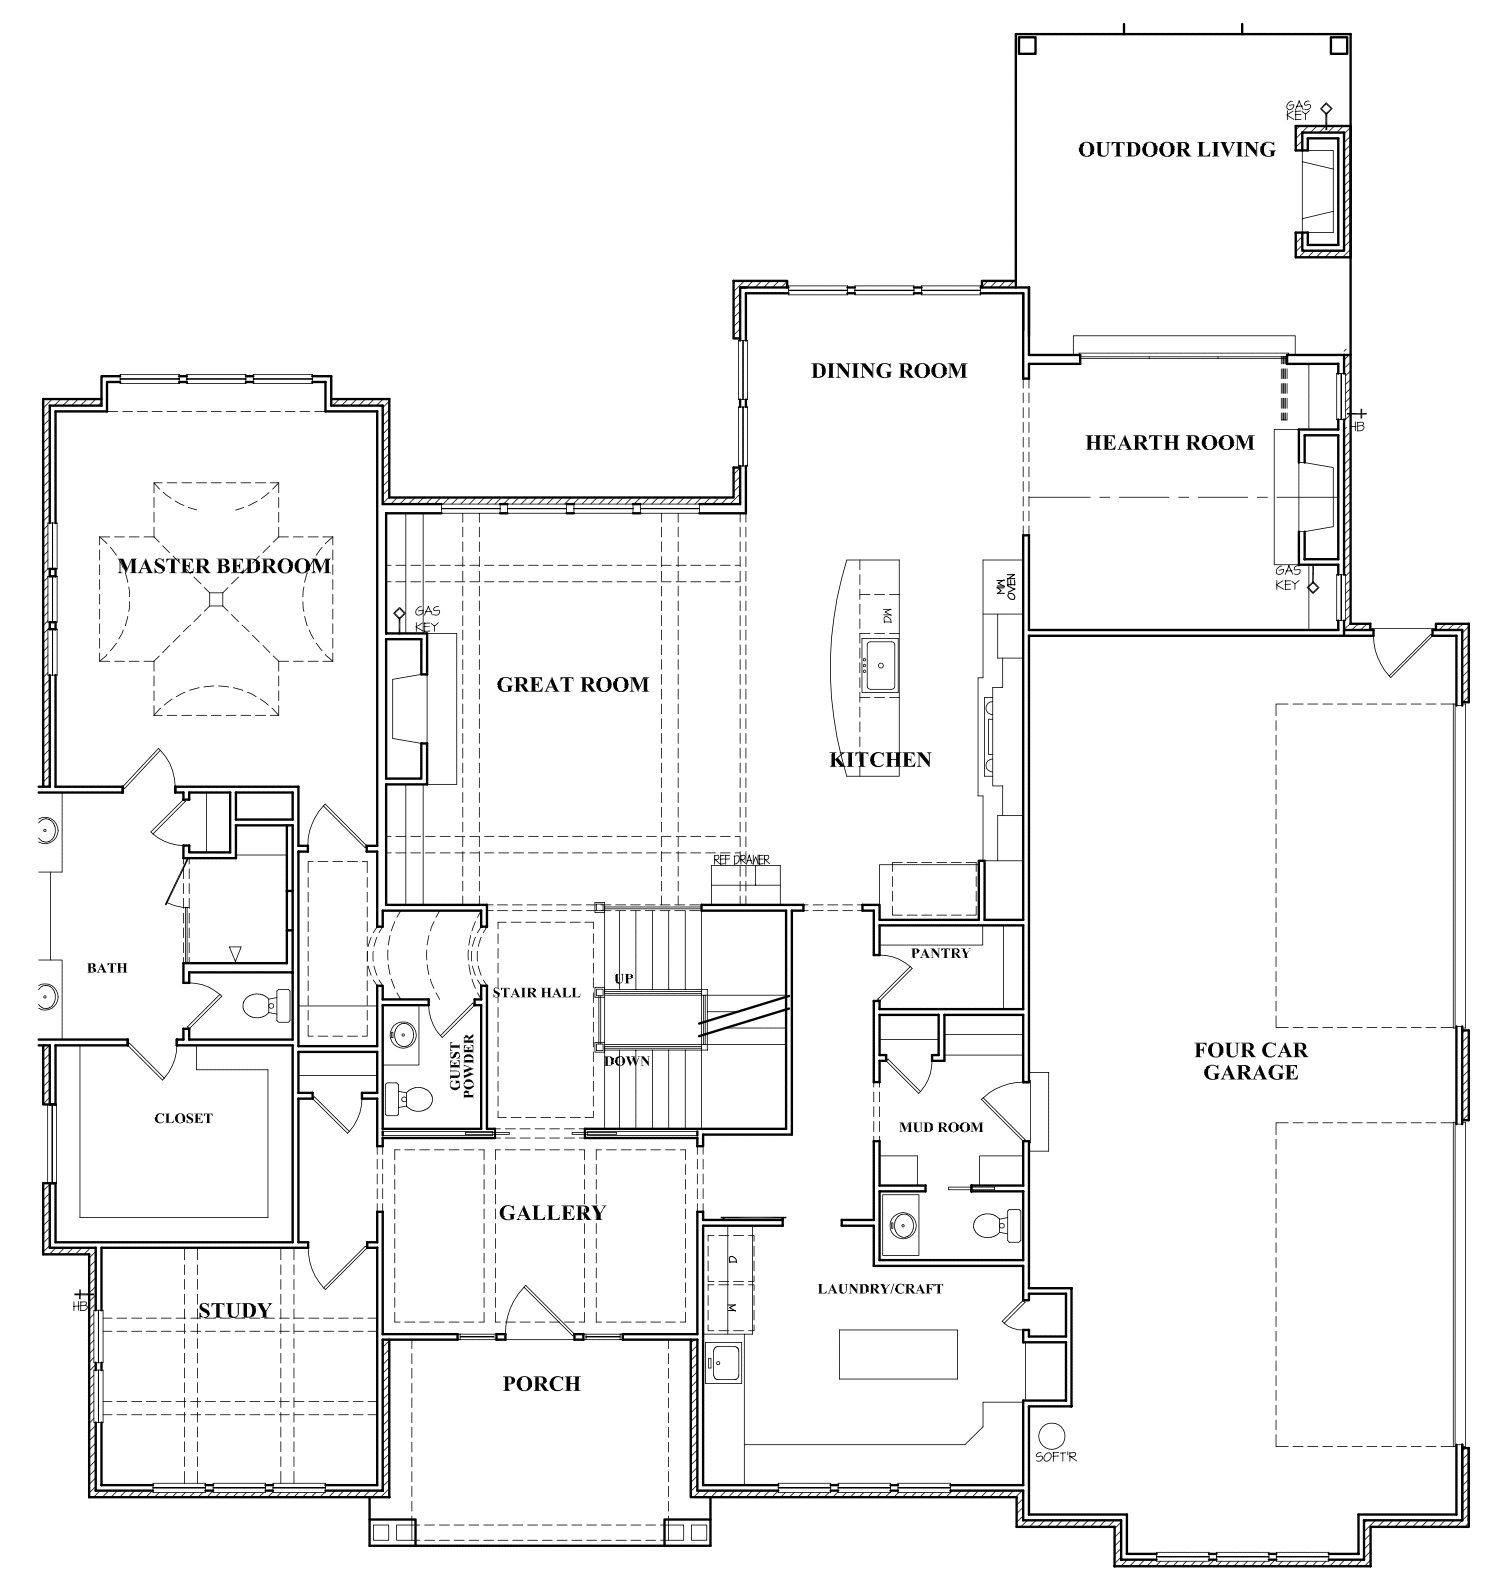 A custom home builder in Indianapolis Indiana offers new homes for sale in Carmel Indiana and Fishers Indiana. This particular floor plan features two bedrooms and two bathrooms.